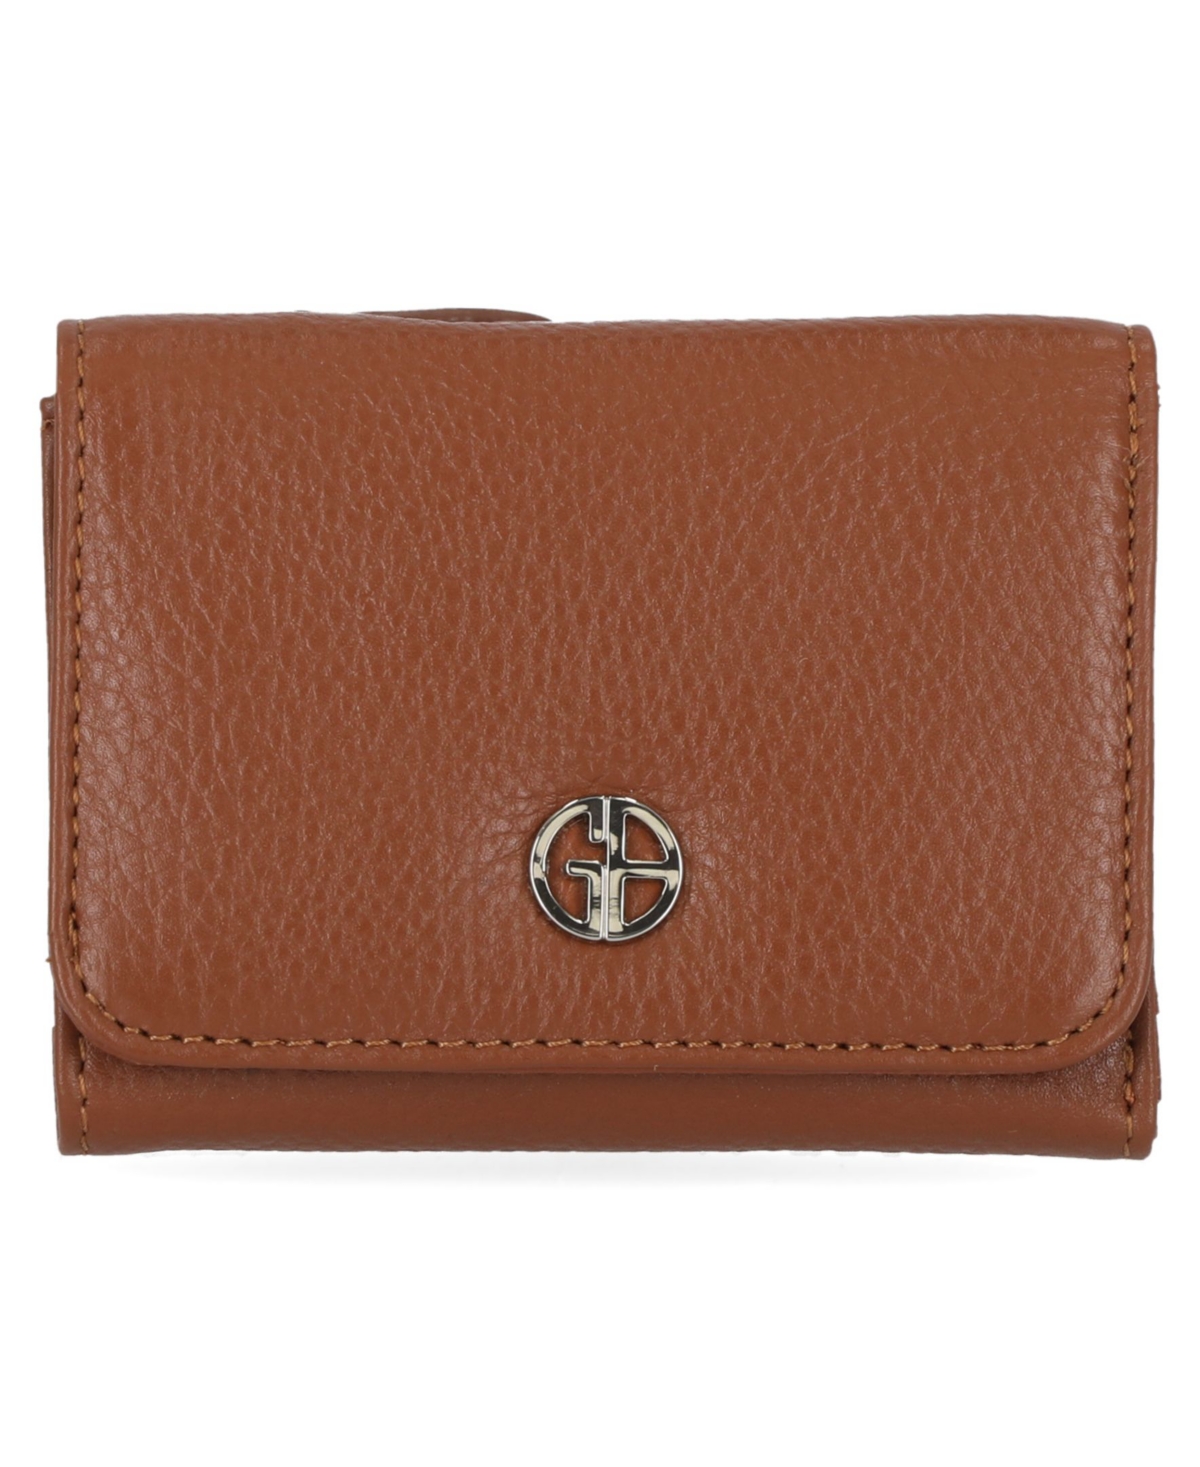 Giani Bernini Softy Leather Trifold Wallet, Created For Macy's In Cognac,silver